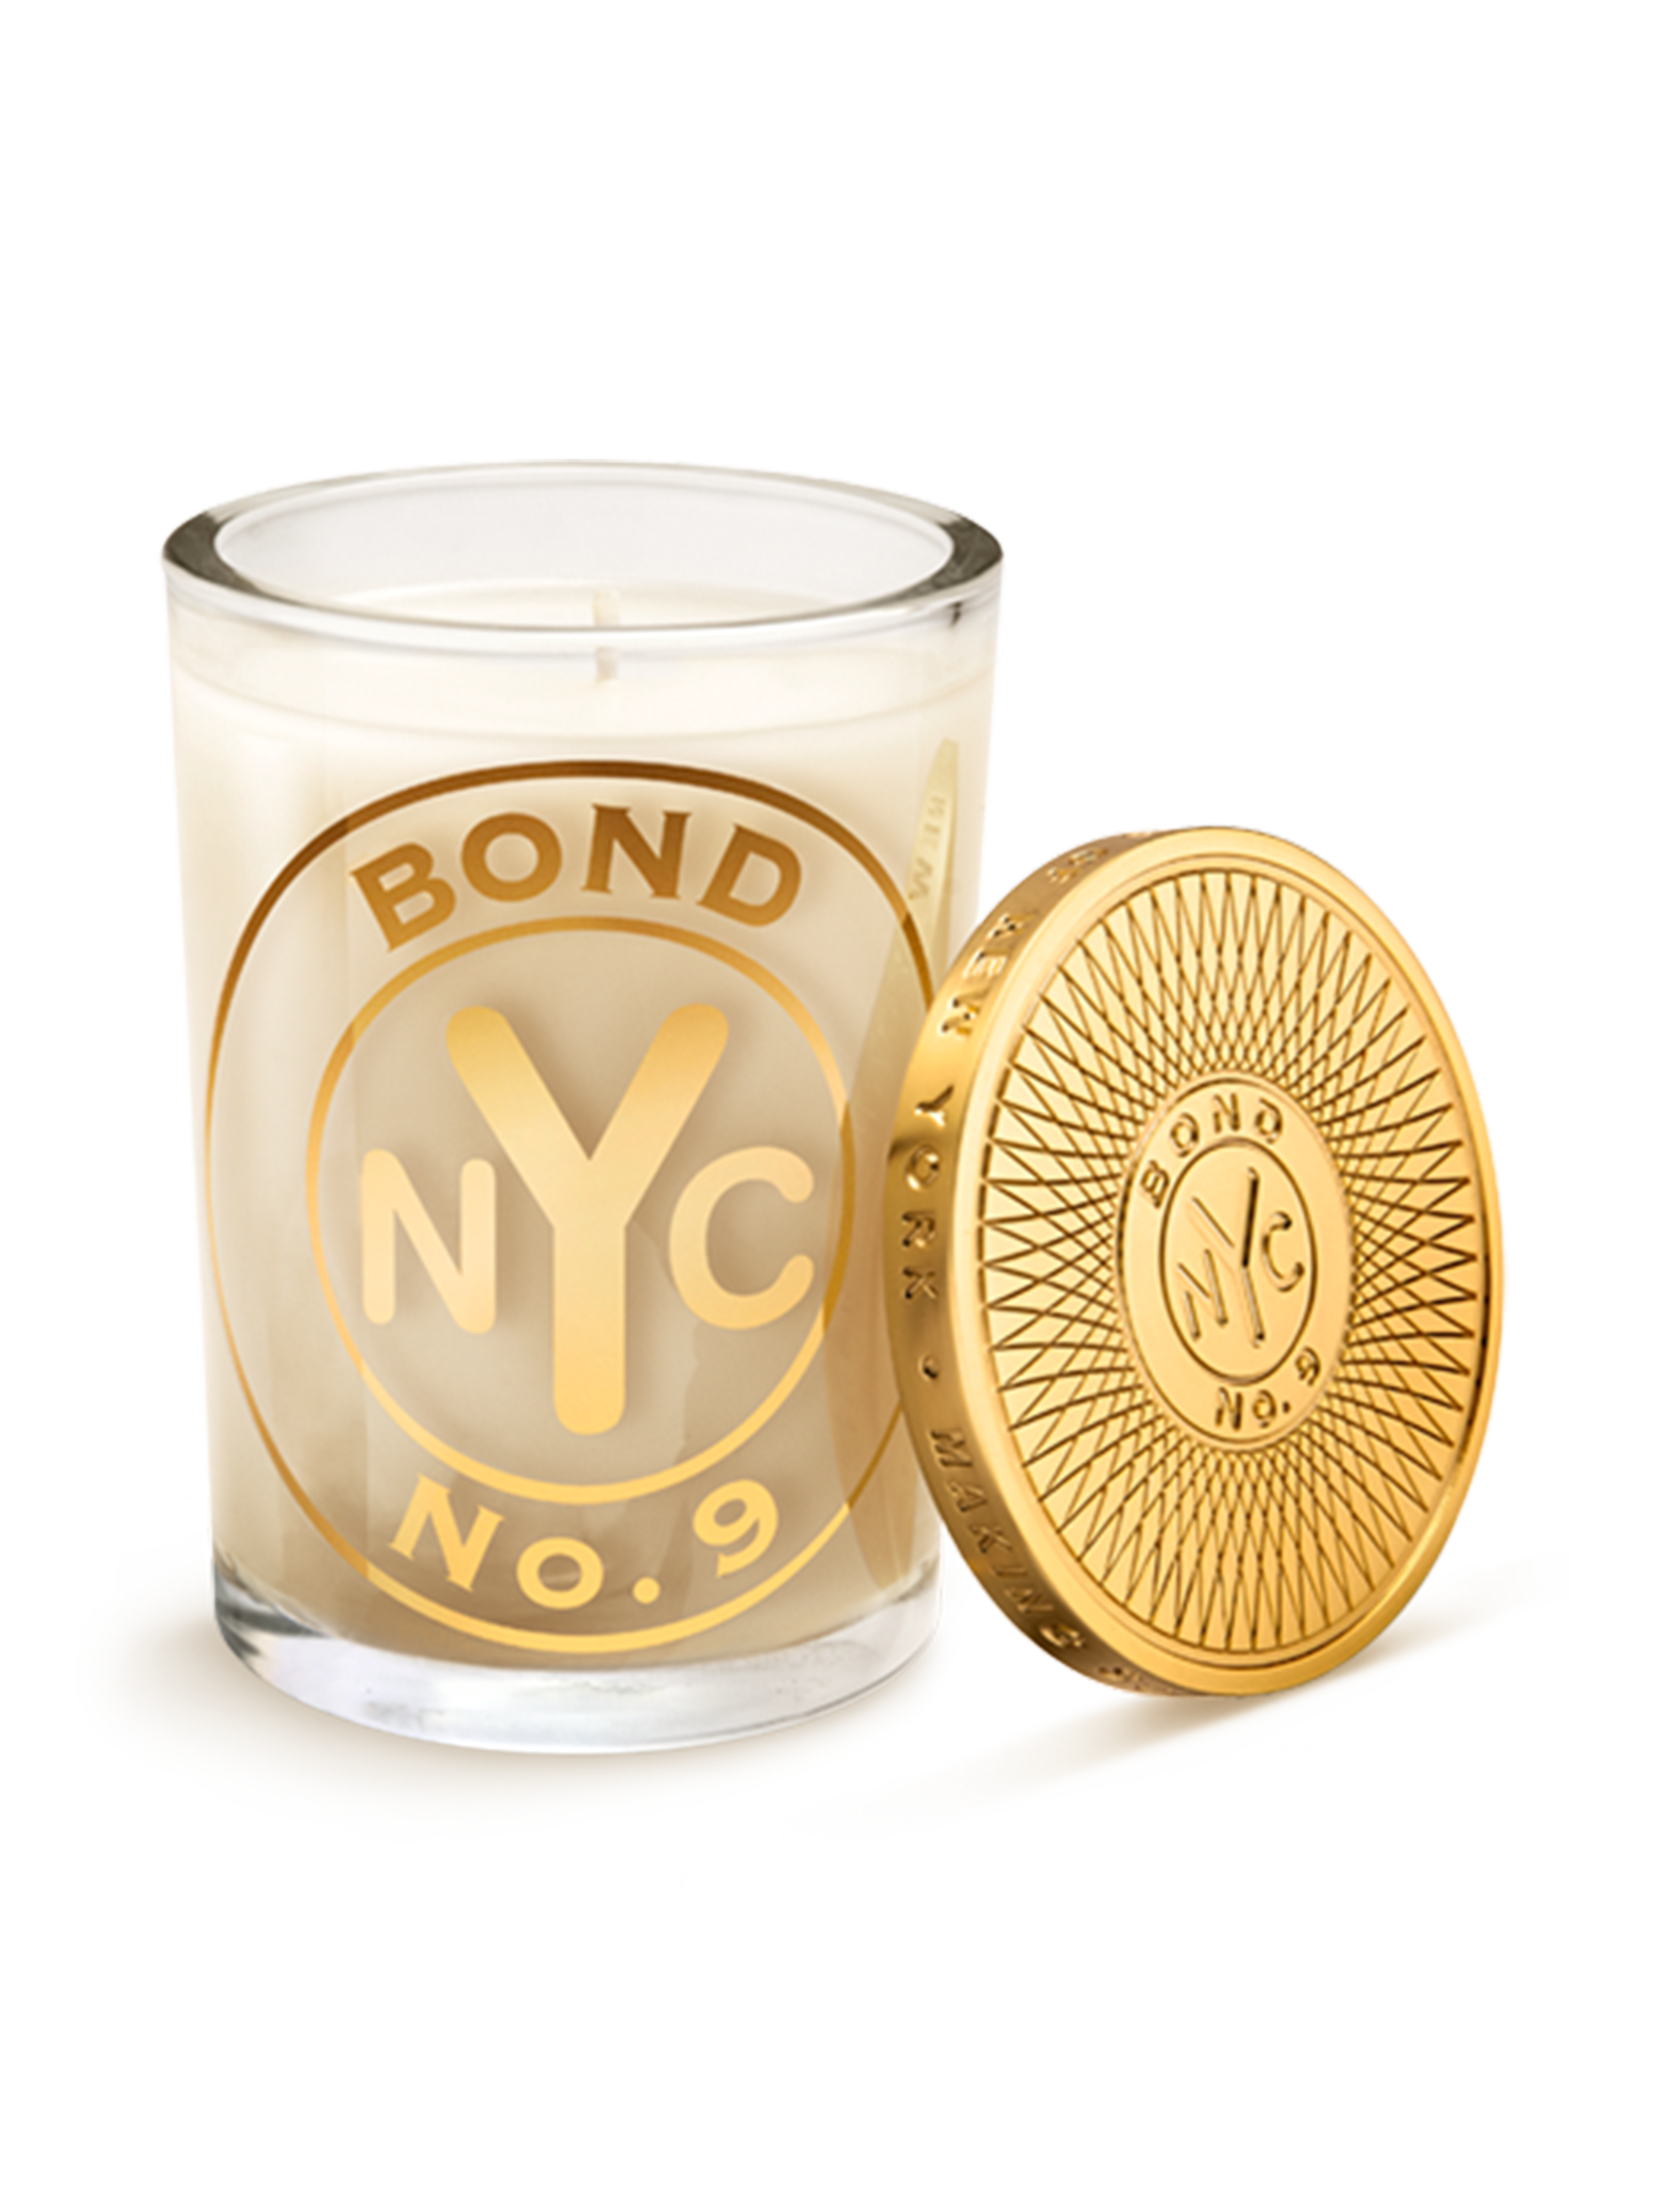 BOND NO. 9 NEW YORK SIGNATURE SCENTED CANDLE